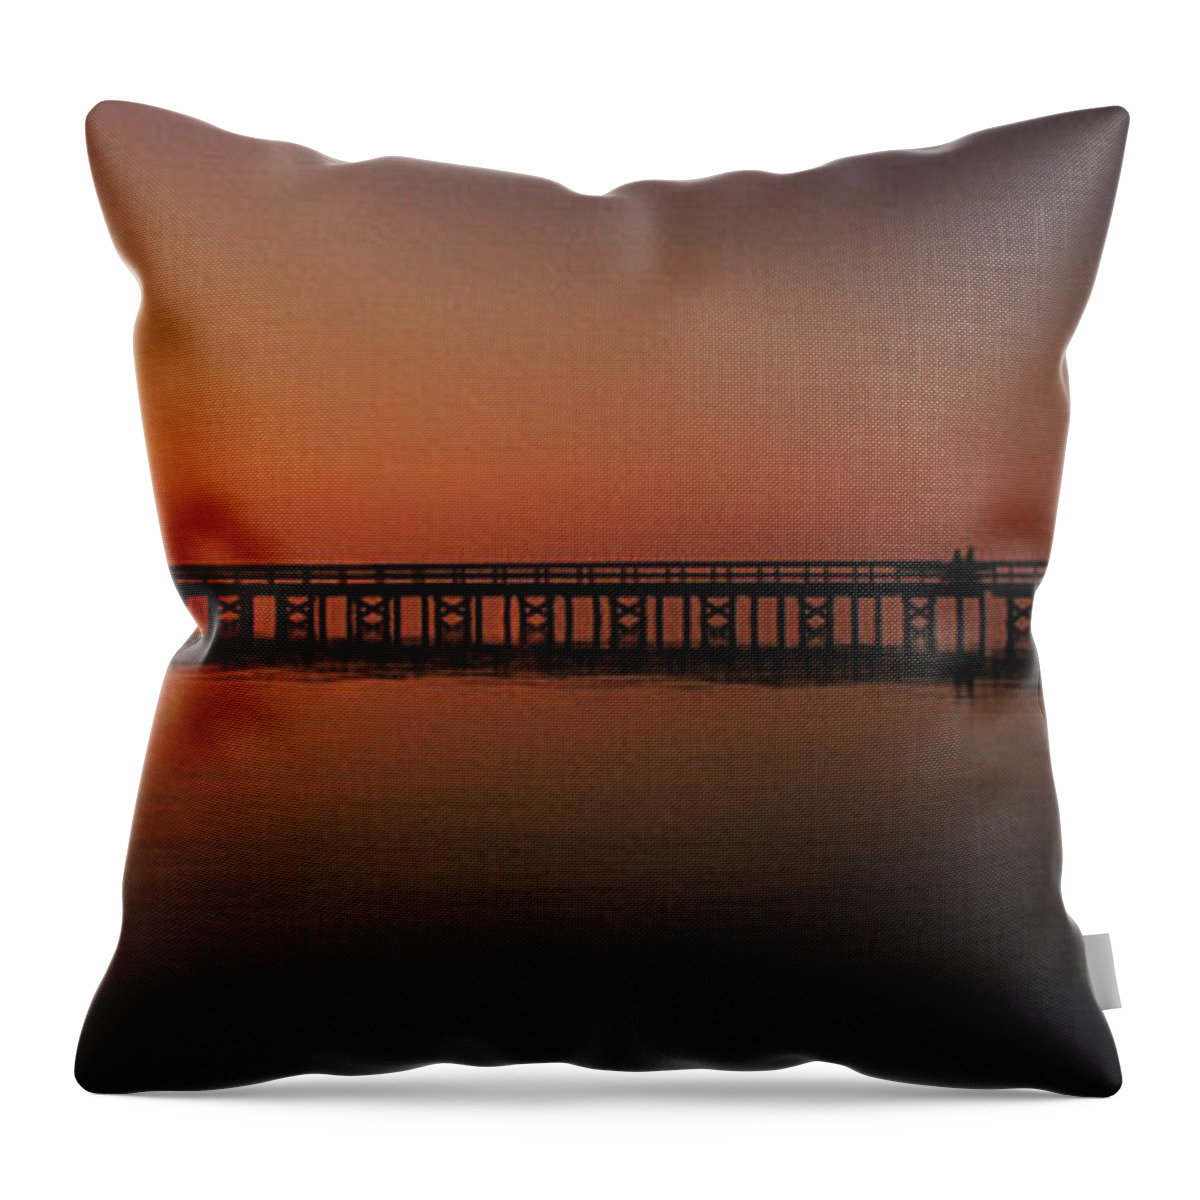 Hilton Pier Throw Pillow featuring the photograph Forever by Ola Allen